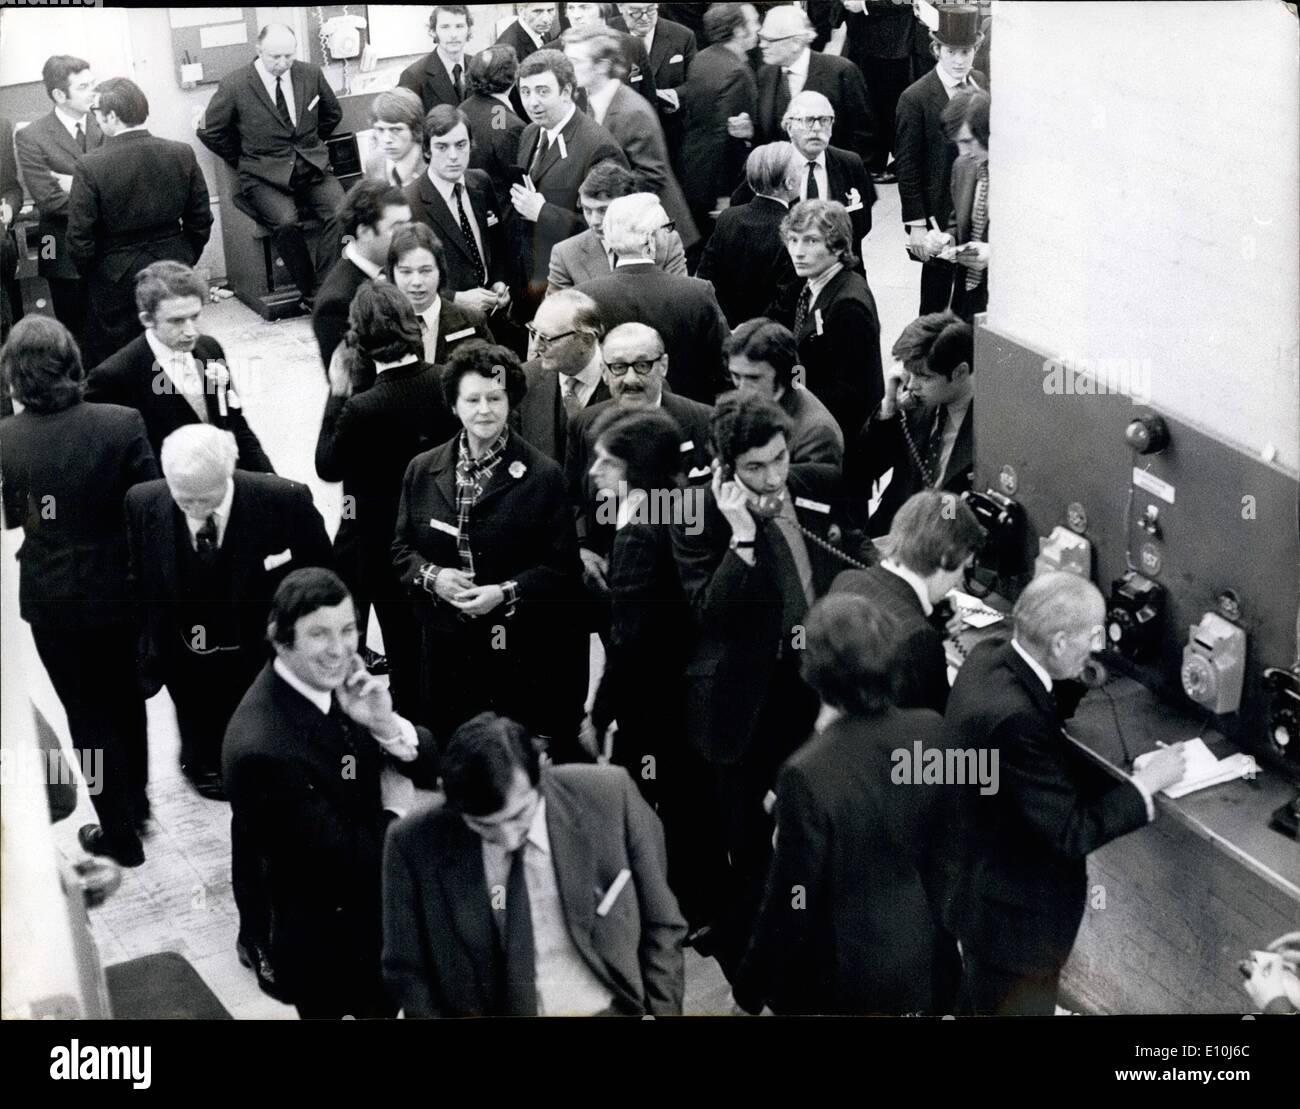 Mar. 03, 1973 - First Women take the floor at the Stock Exchange: For the first time since the Stock Exchange opened in 1802, women were yesterday admitted to the Exchange floor during trading hours. Photo shows Mrs. Muriel Wood, who led the campaign for the admittance of women to the floor of the Stock Exchange, pictured yesterday surrounded by male colleagues, when she and five other women made their first appearance there. Stock Photo